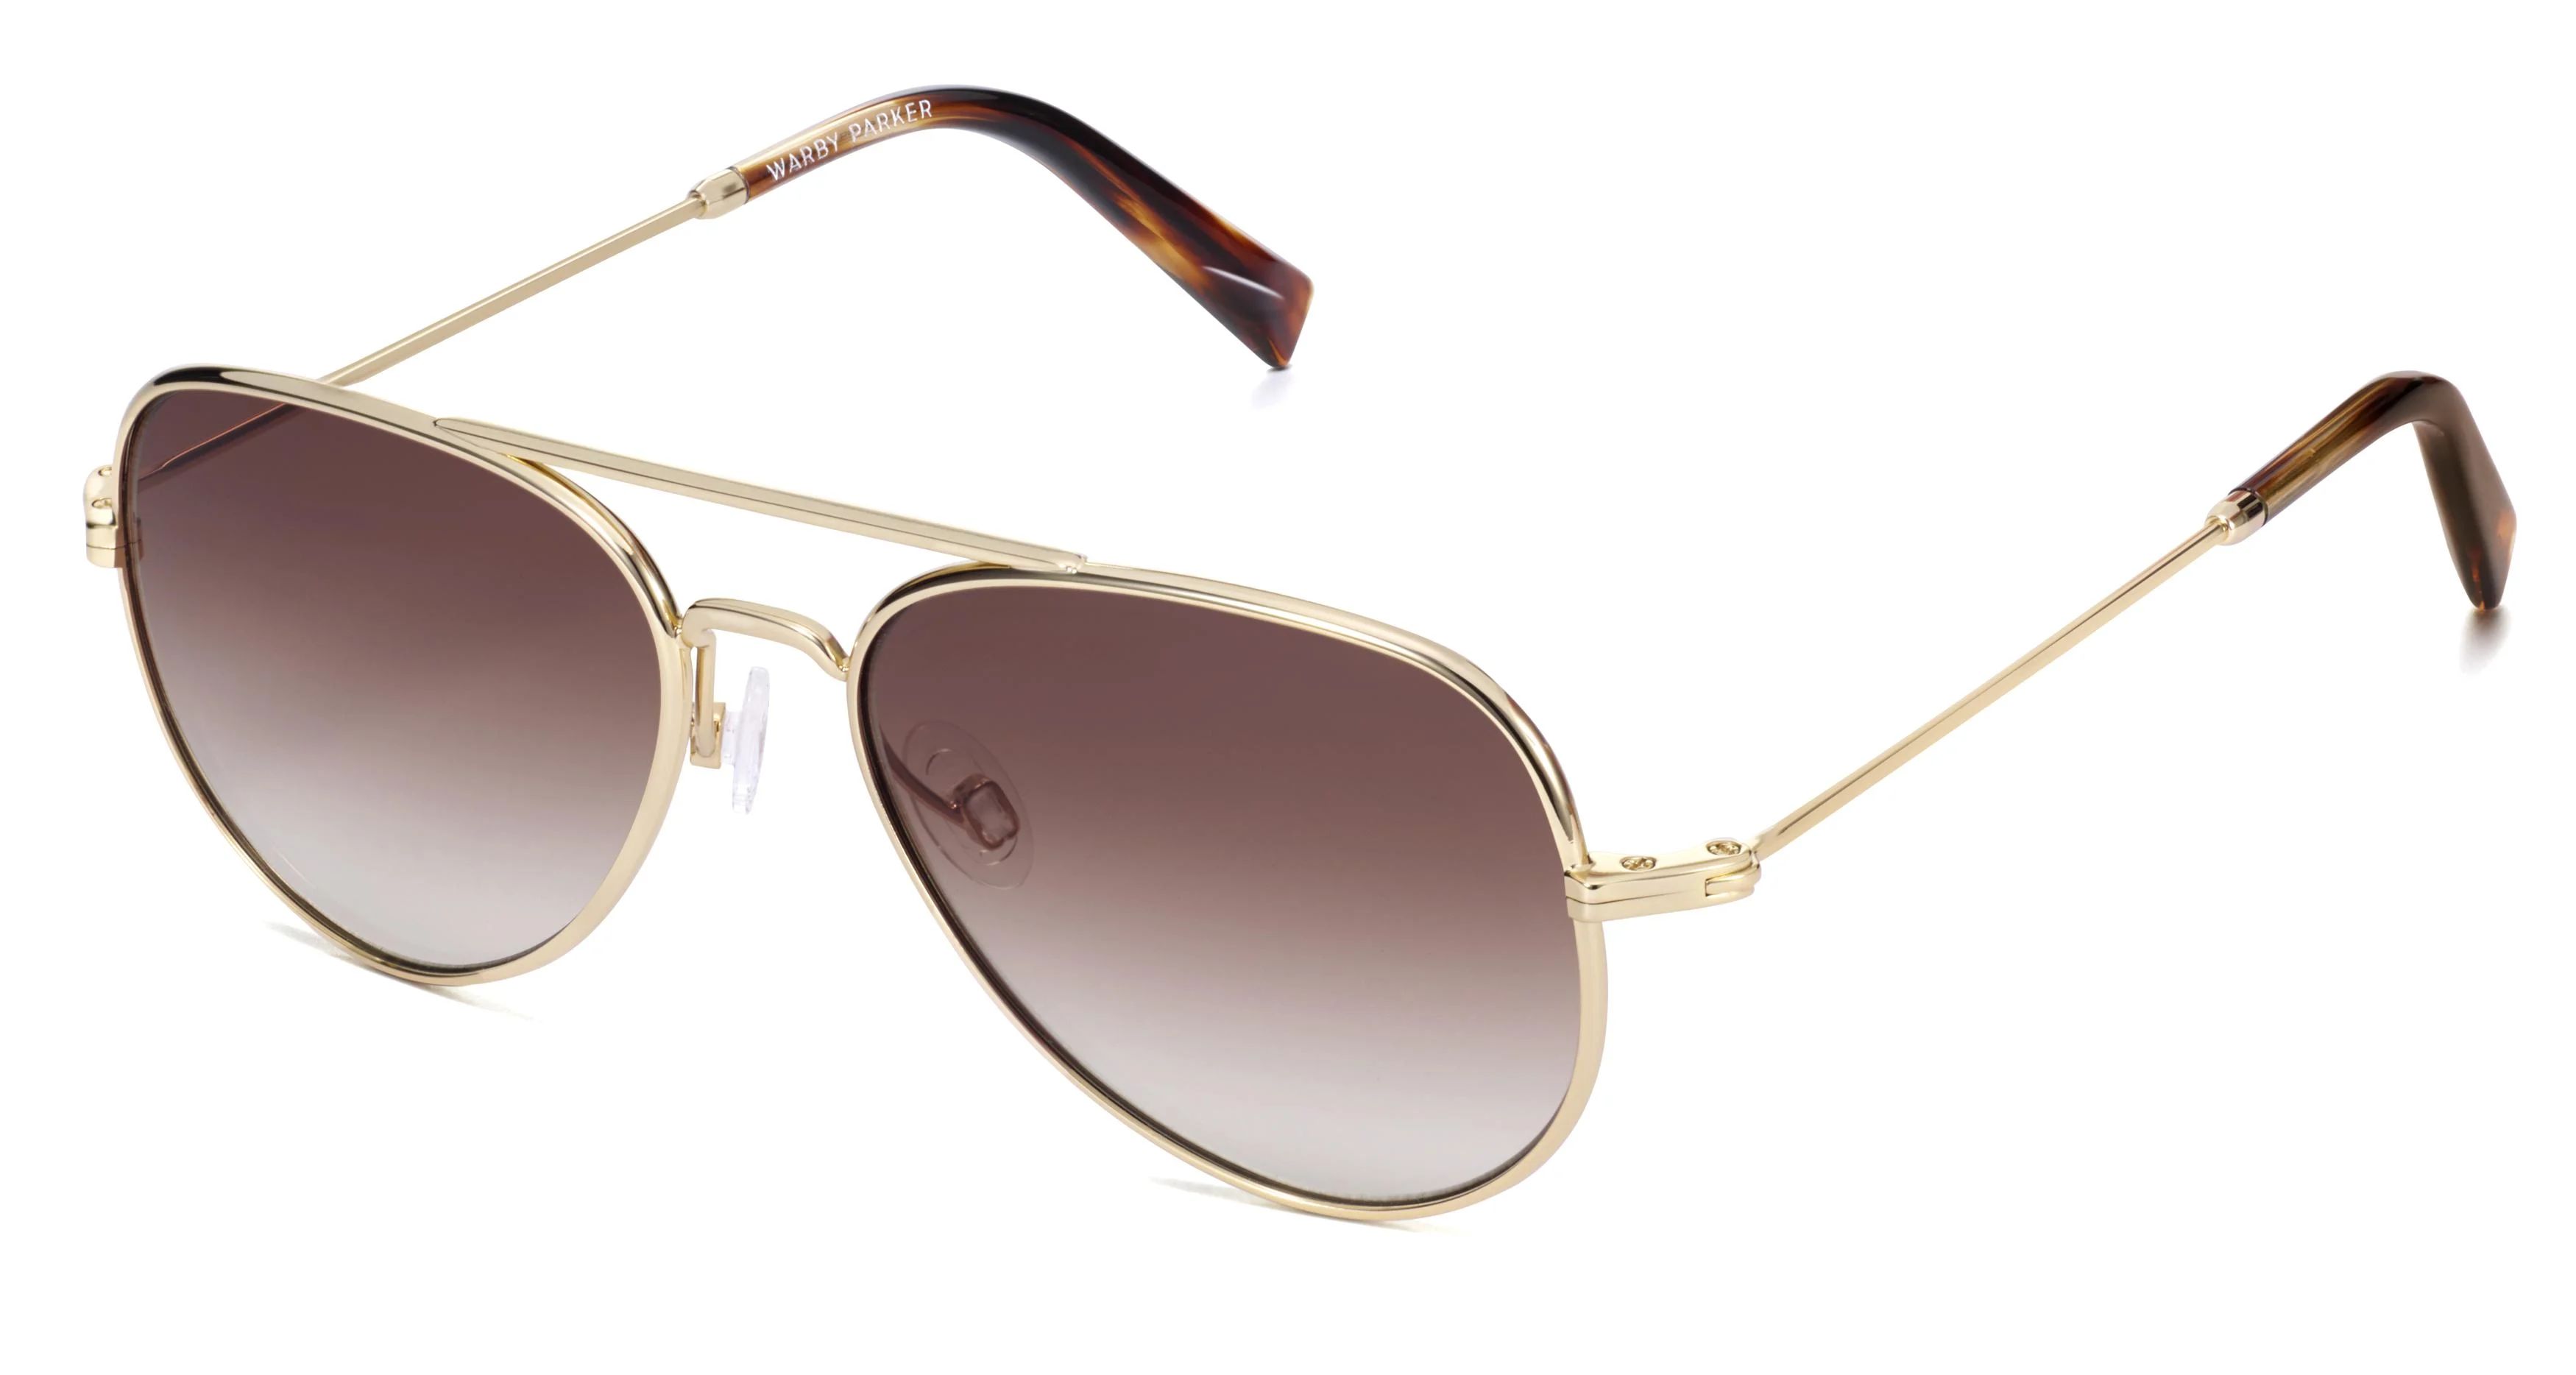 Raider Sunglasses in Polished Gold | Warby Parker | Warby Parker (US)